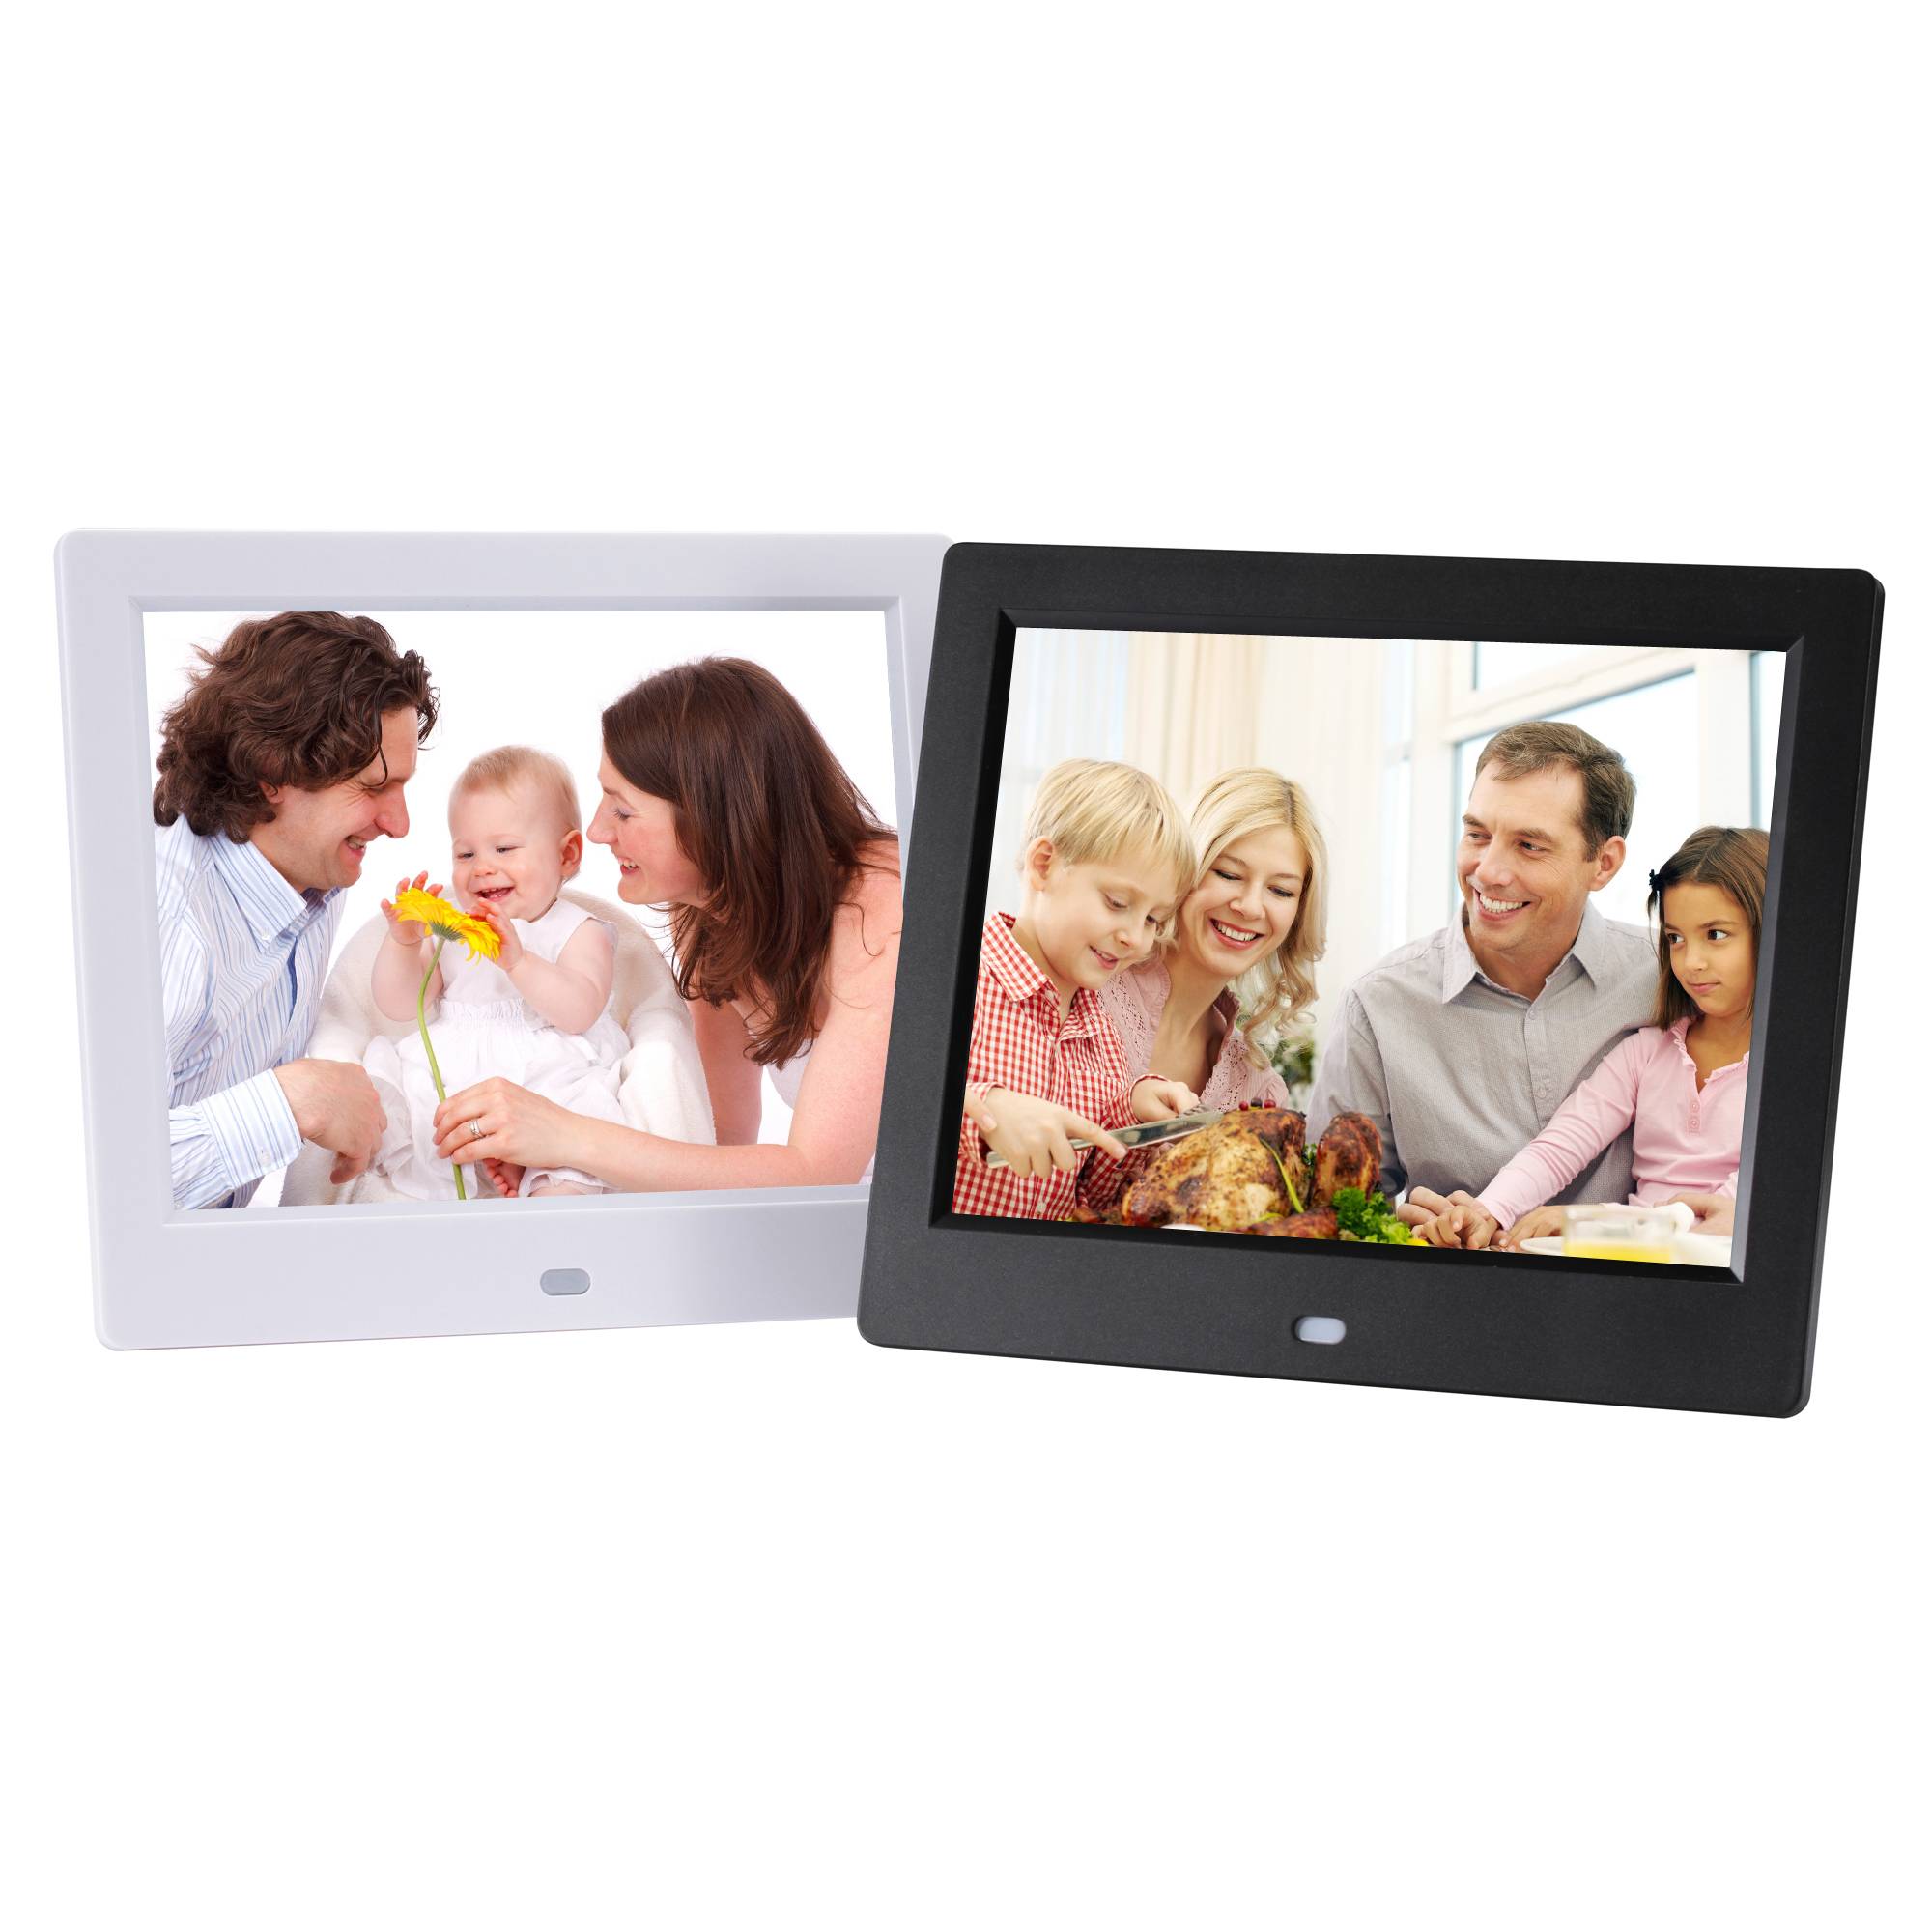 100% Original 10 Inch Digital Picture Frame - 8 inch slideshow cheap video player digital picture frame digital photo frame commercial advertising HD support 720P – Idealway